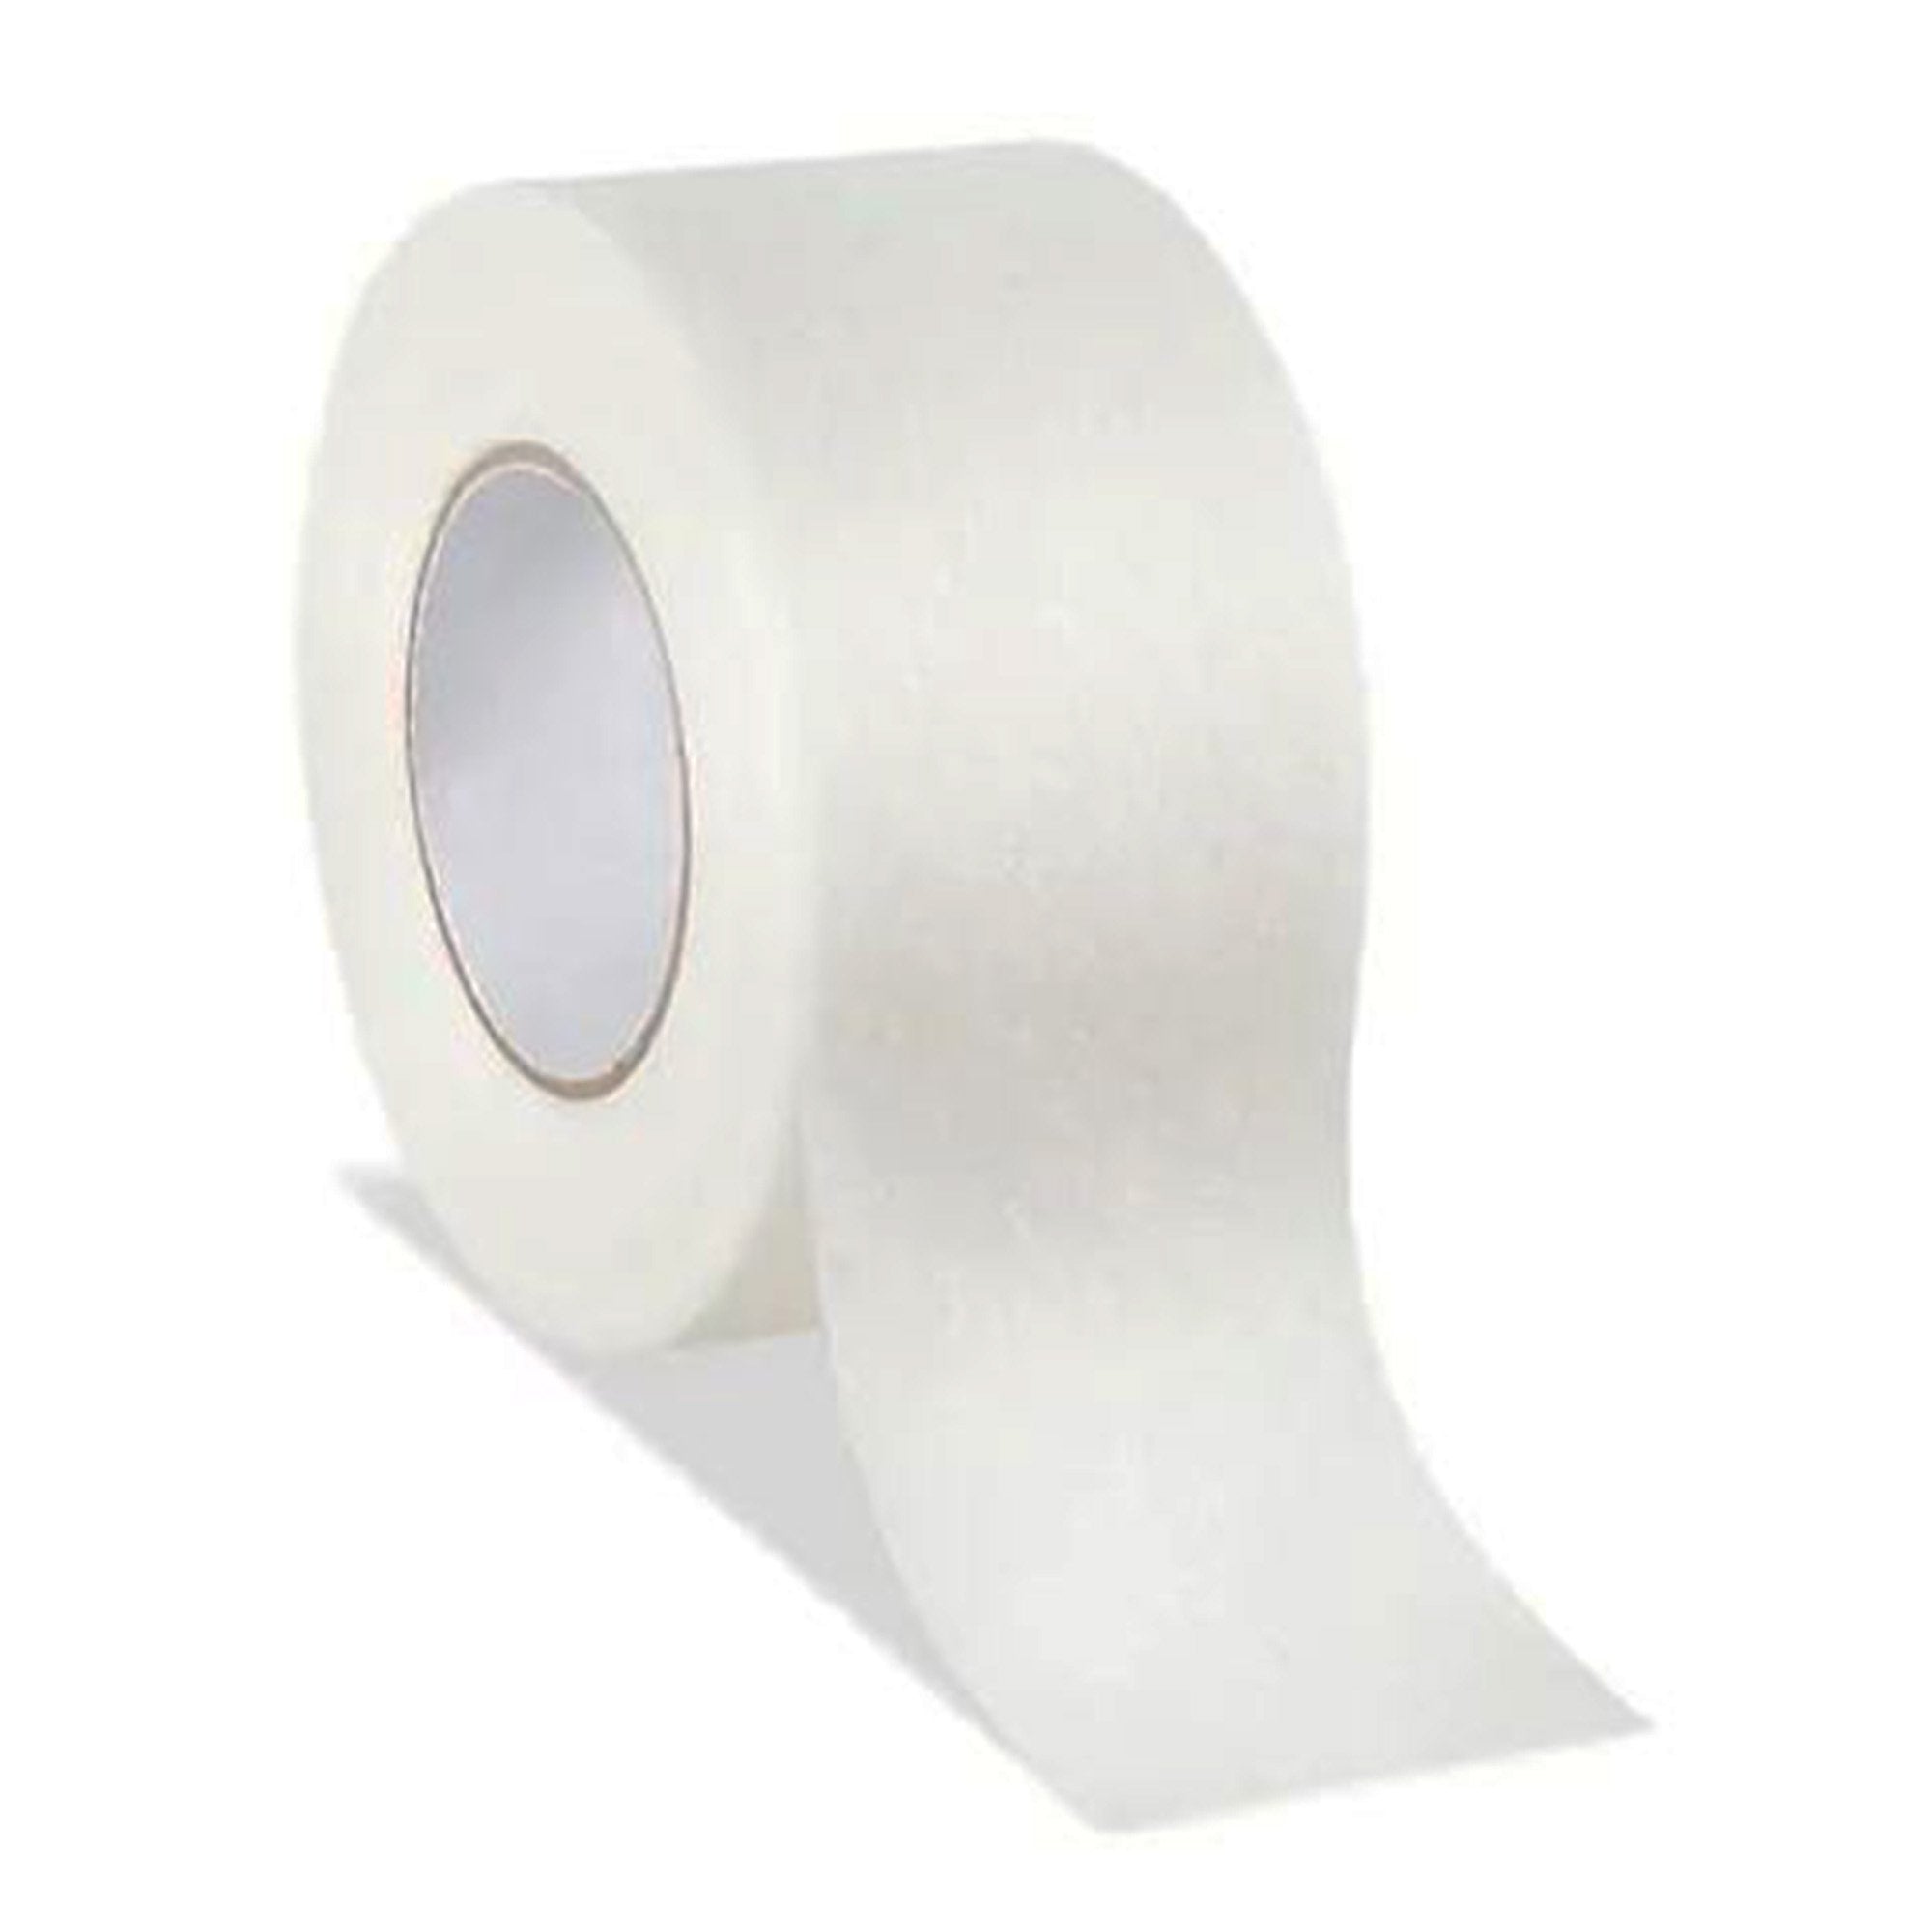 Micropore Standard Hypoallergenic Paper Surgical Tape 1 x 10 Yards, 1 Count 4 Pack